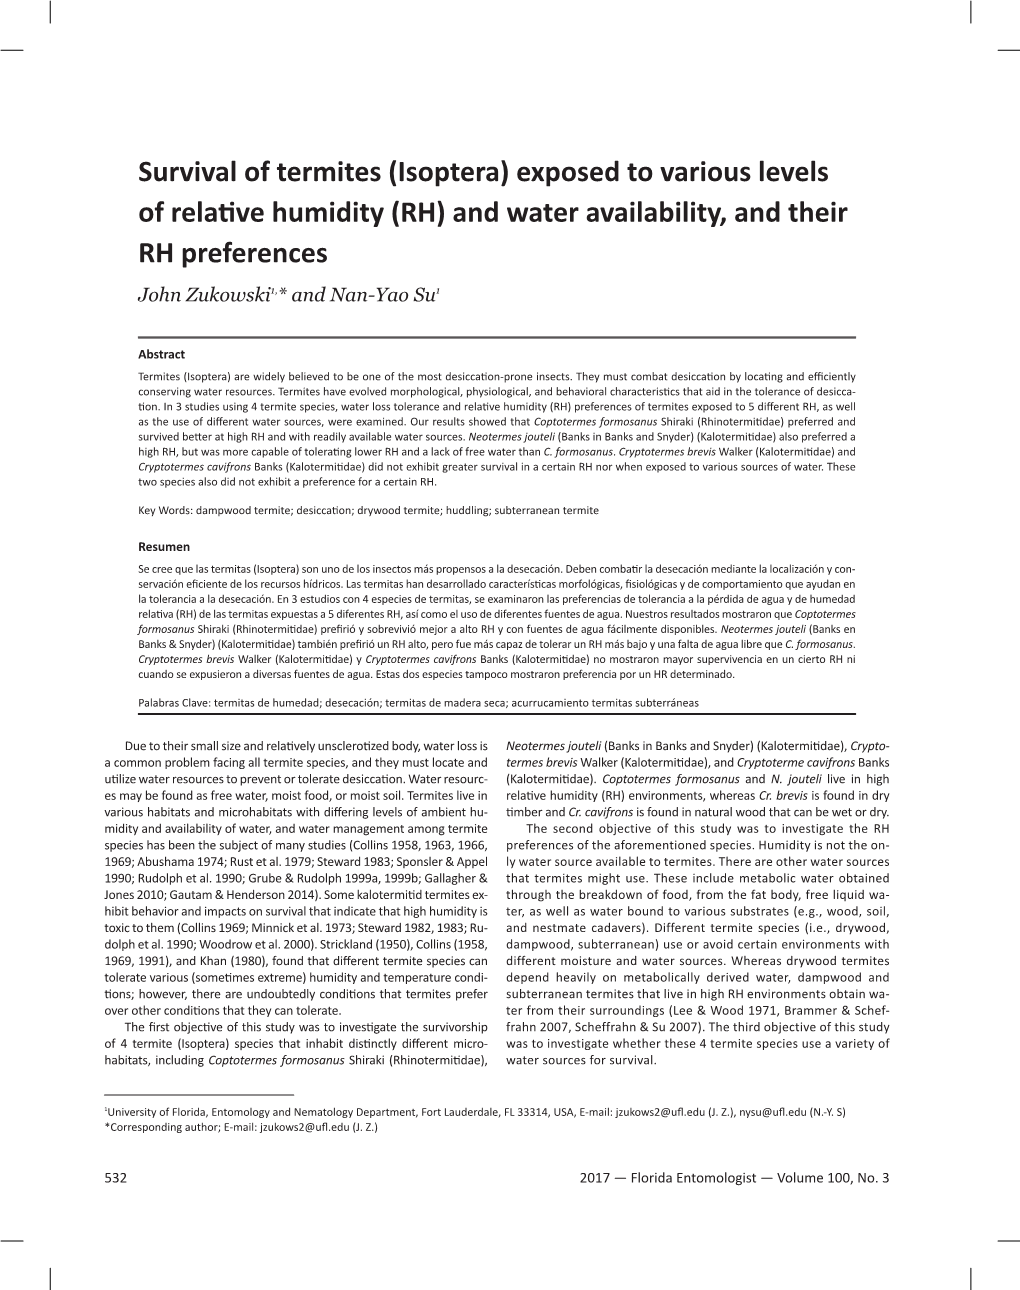 Survival of Termites (Isoptera) Exposed to Various Levels of Relative Humidity (RH) and Water Availability, and Their RH Preferences